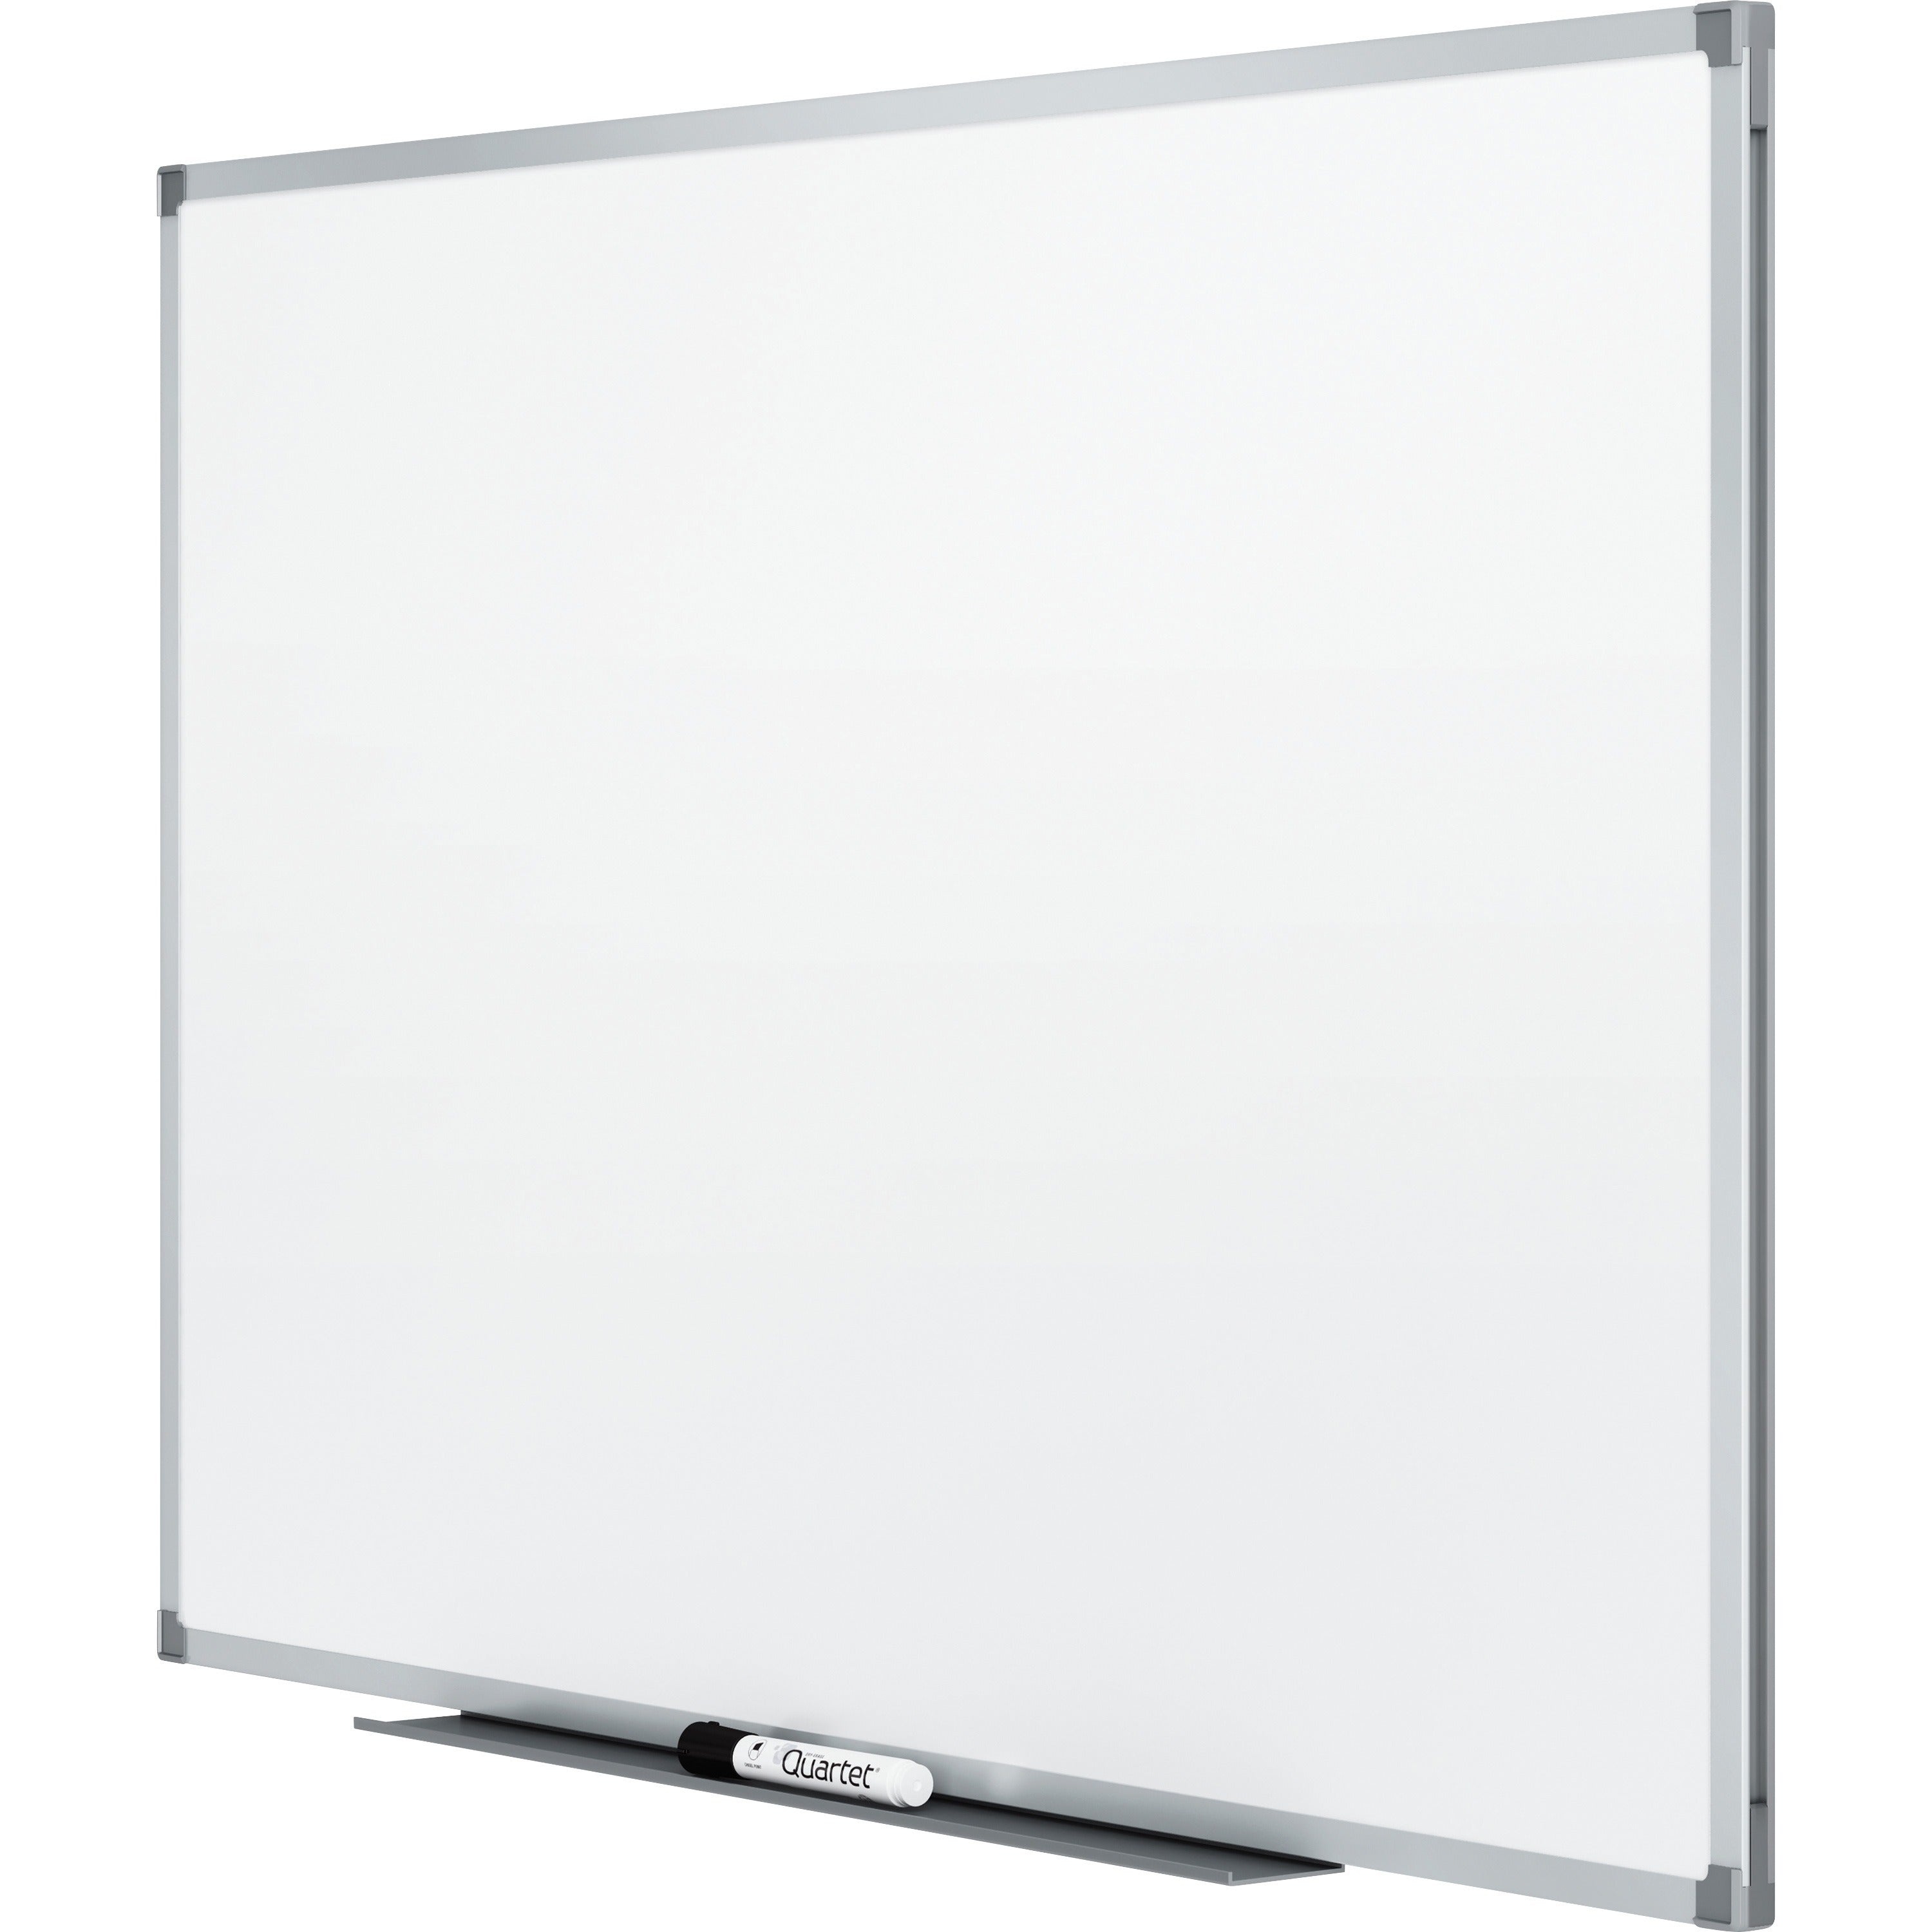 quartet-standard-duramax-magnetic-whiteboard-72-6-ft-width-x-48-4-ft-height-white-porcelain-surface-silver-aluminum-frame-rectangle-horizontal-vertical-magnetic-assembly-required-1-each-taa-compliant_qrt85517 - 2